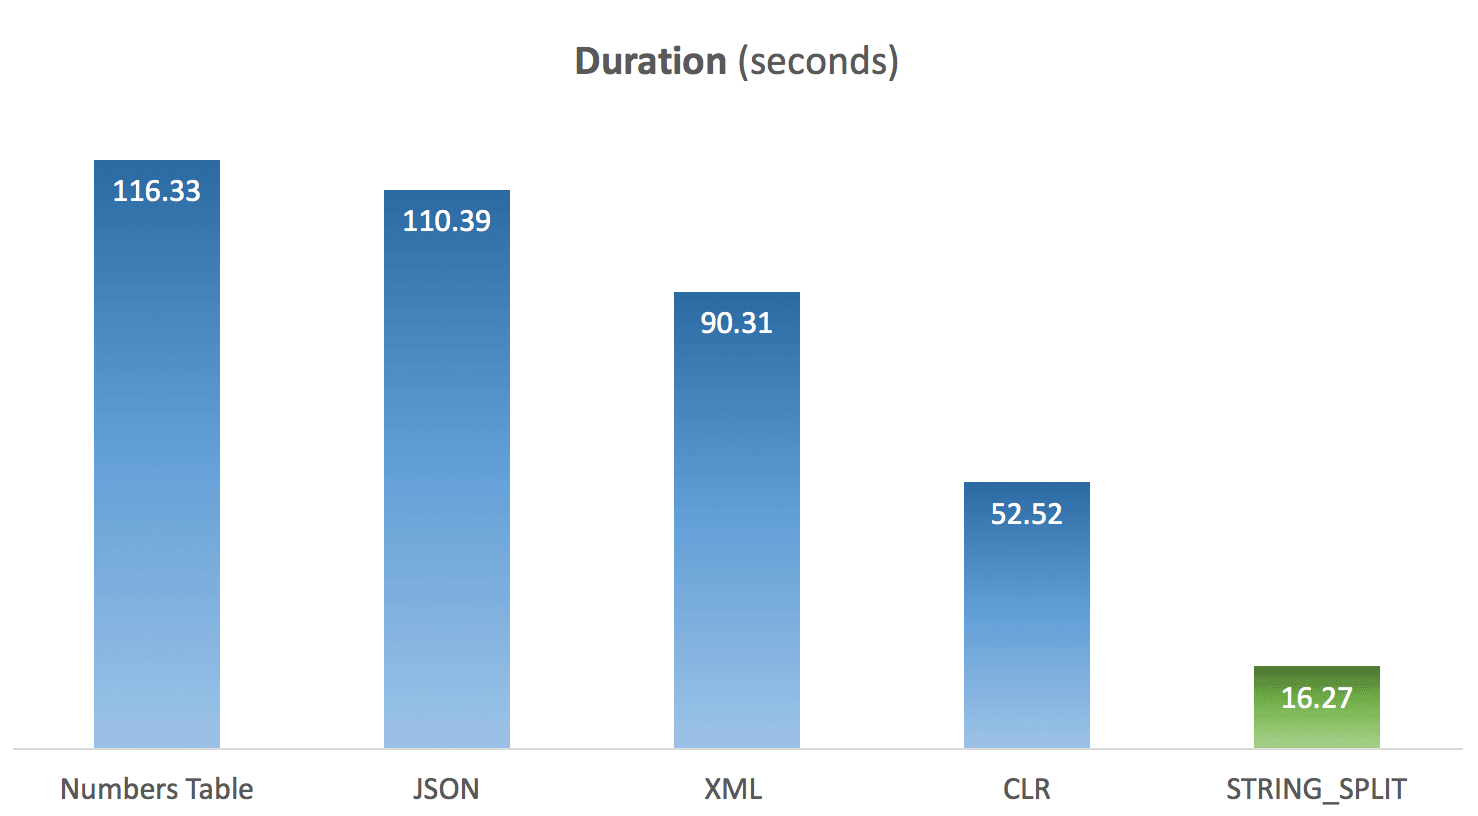 Average duration of STRING_SPLIT compared to other methods